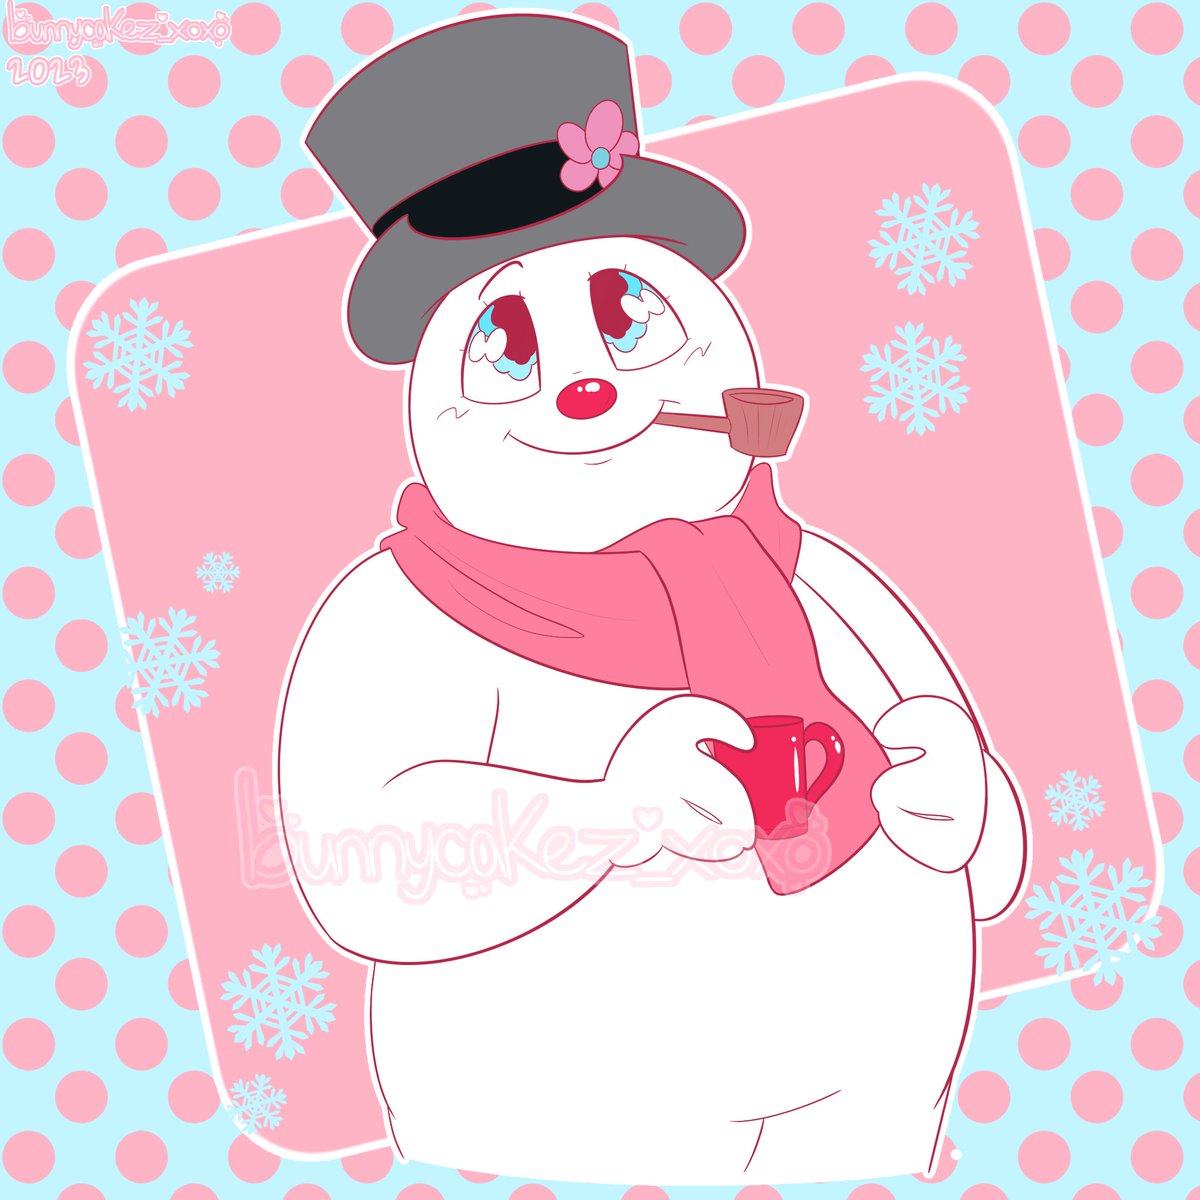 #Christmas2023 #Christmas #winter #winterholiday #holiday #snowman #frostythesnowman #fanart #digitalart #art #artistsontwitter #cuteart 

Thought it'd be fitting to draw Frosty for the holiday season ❄️☃️ (I loved drawing him sm, he's so CUTE SDHOAUDSA)